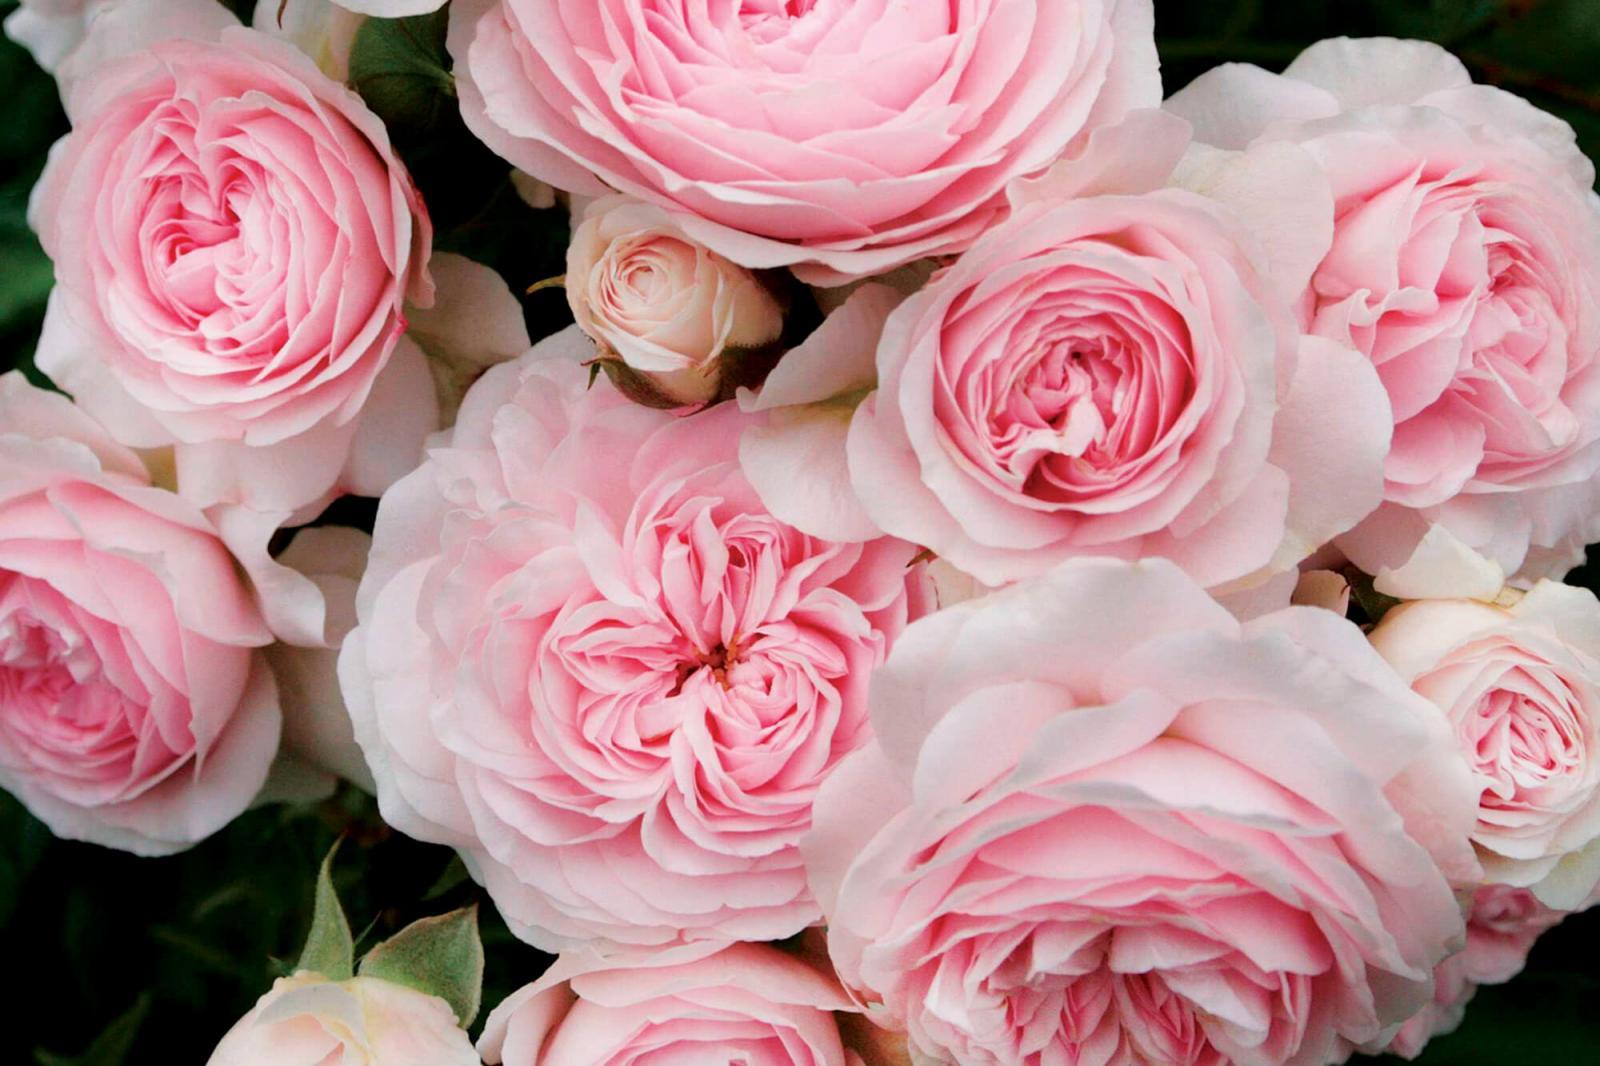 The new website, kordes.us, will showcase an extensive collection of roses.